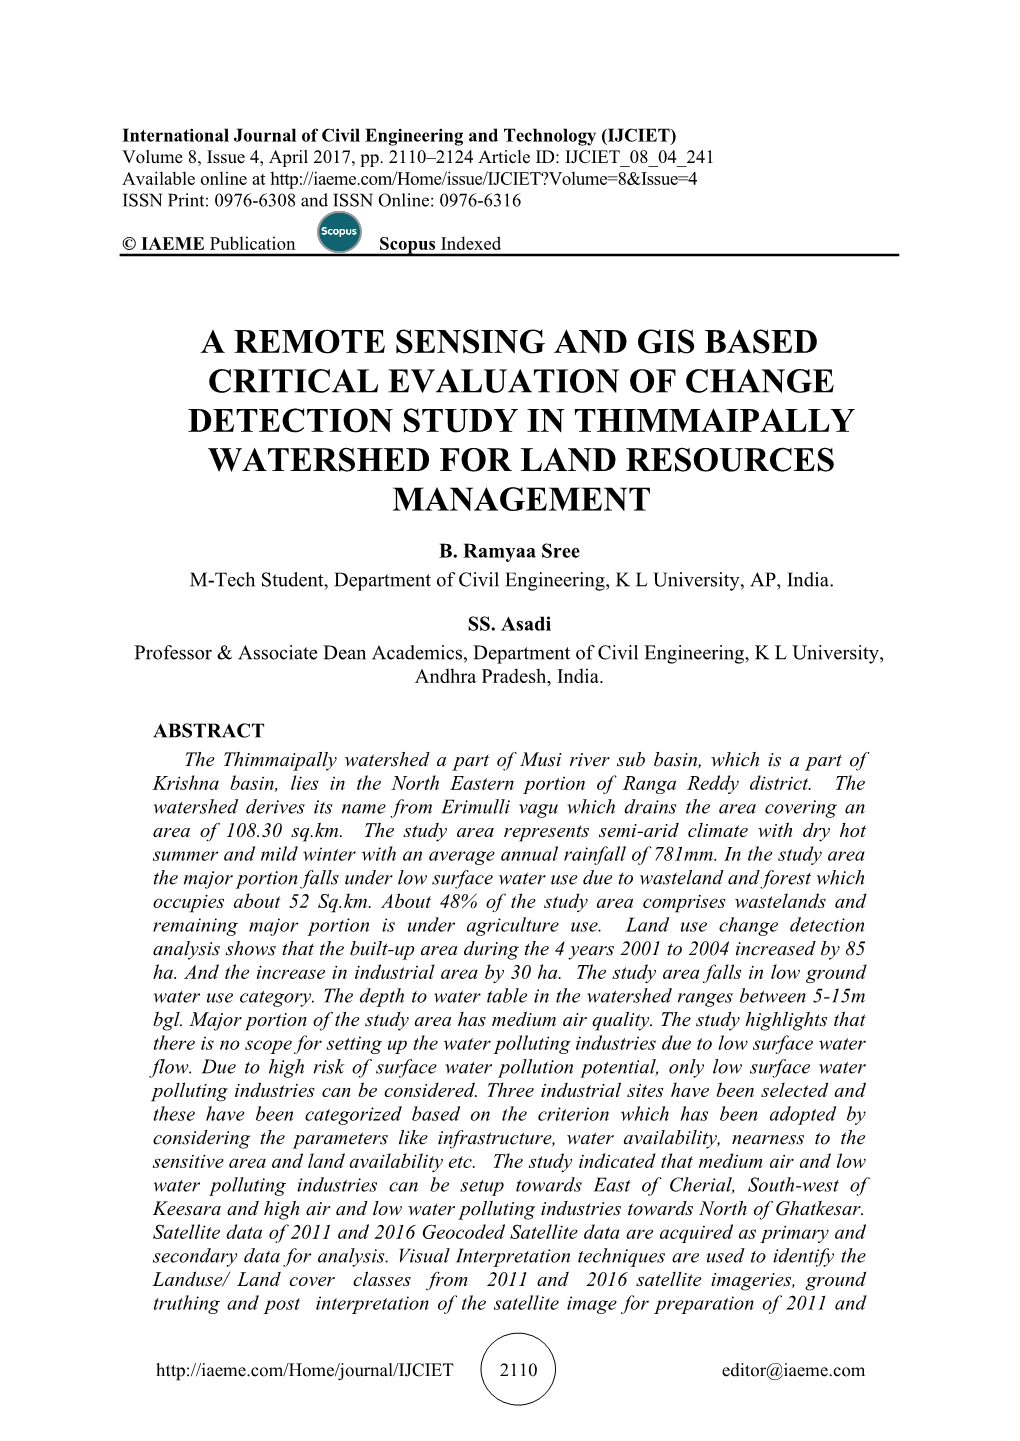 A Remote Sensing and Gis Based Critical Evaluation of Change Detection Study in Thimmaipally Watershed for Land Resources Management